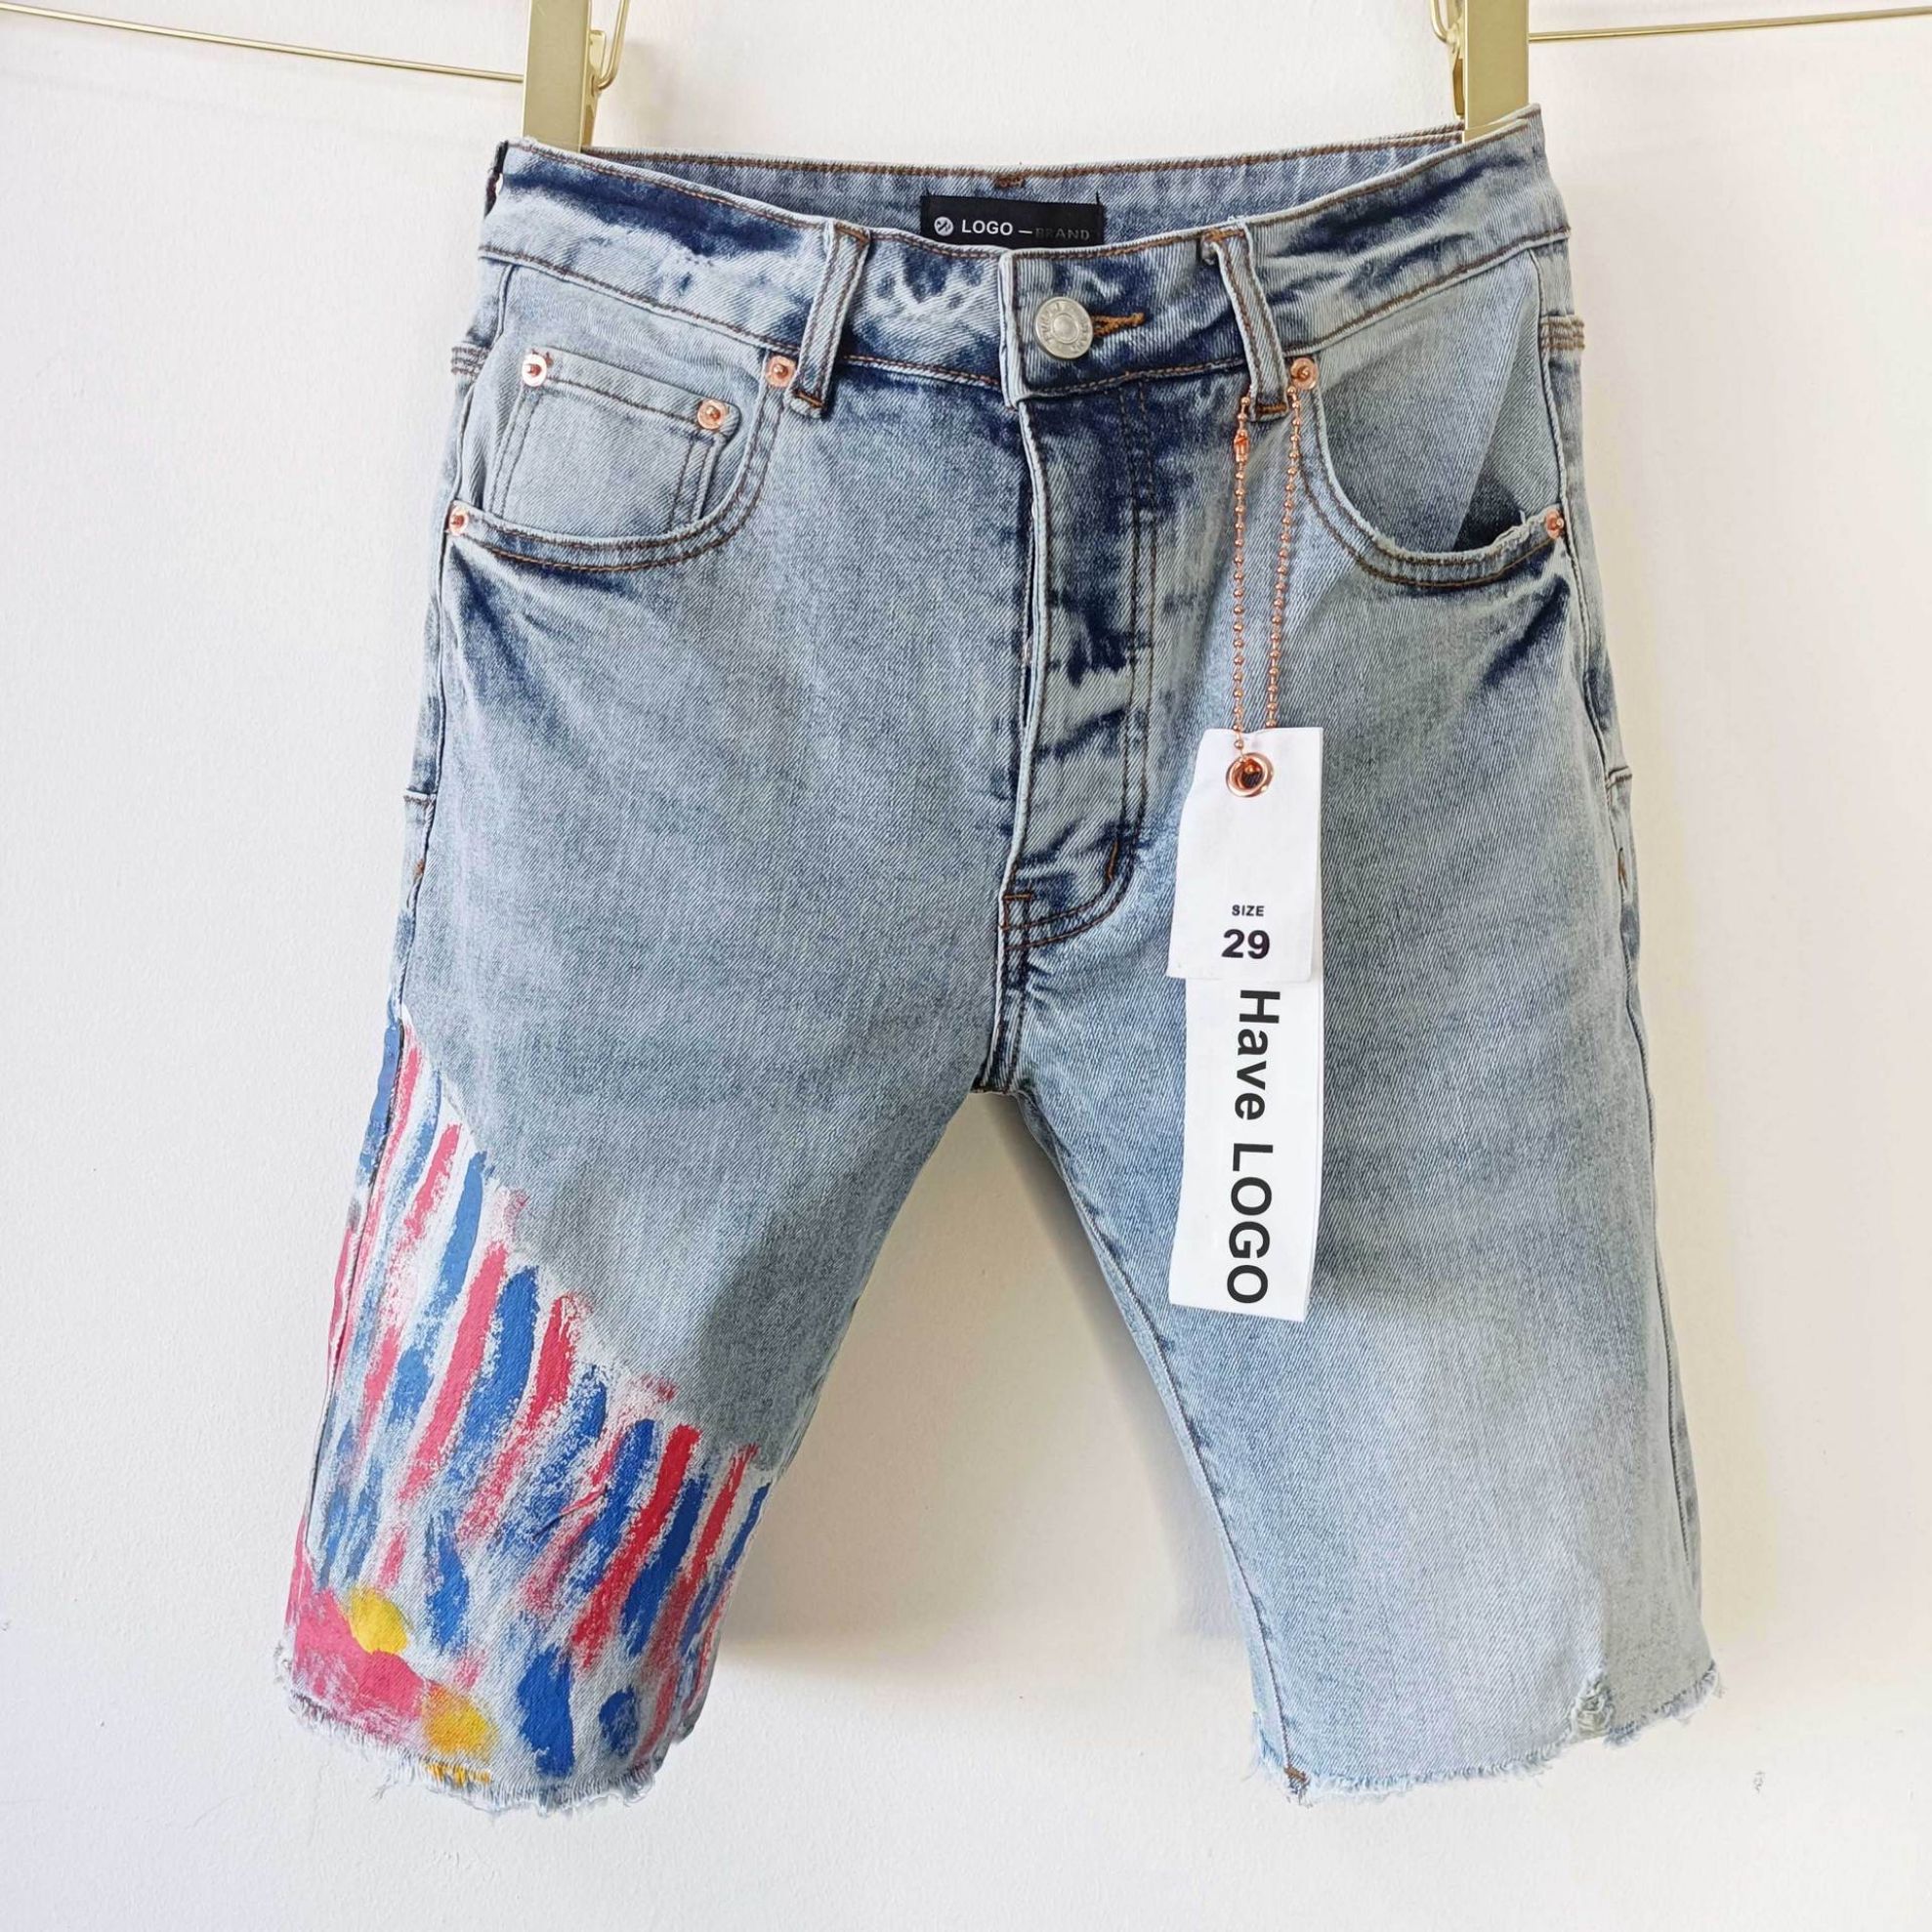 Jeans Shorts 816225